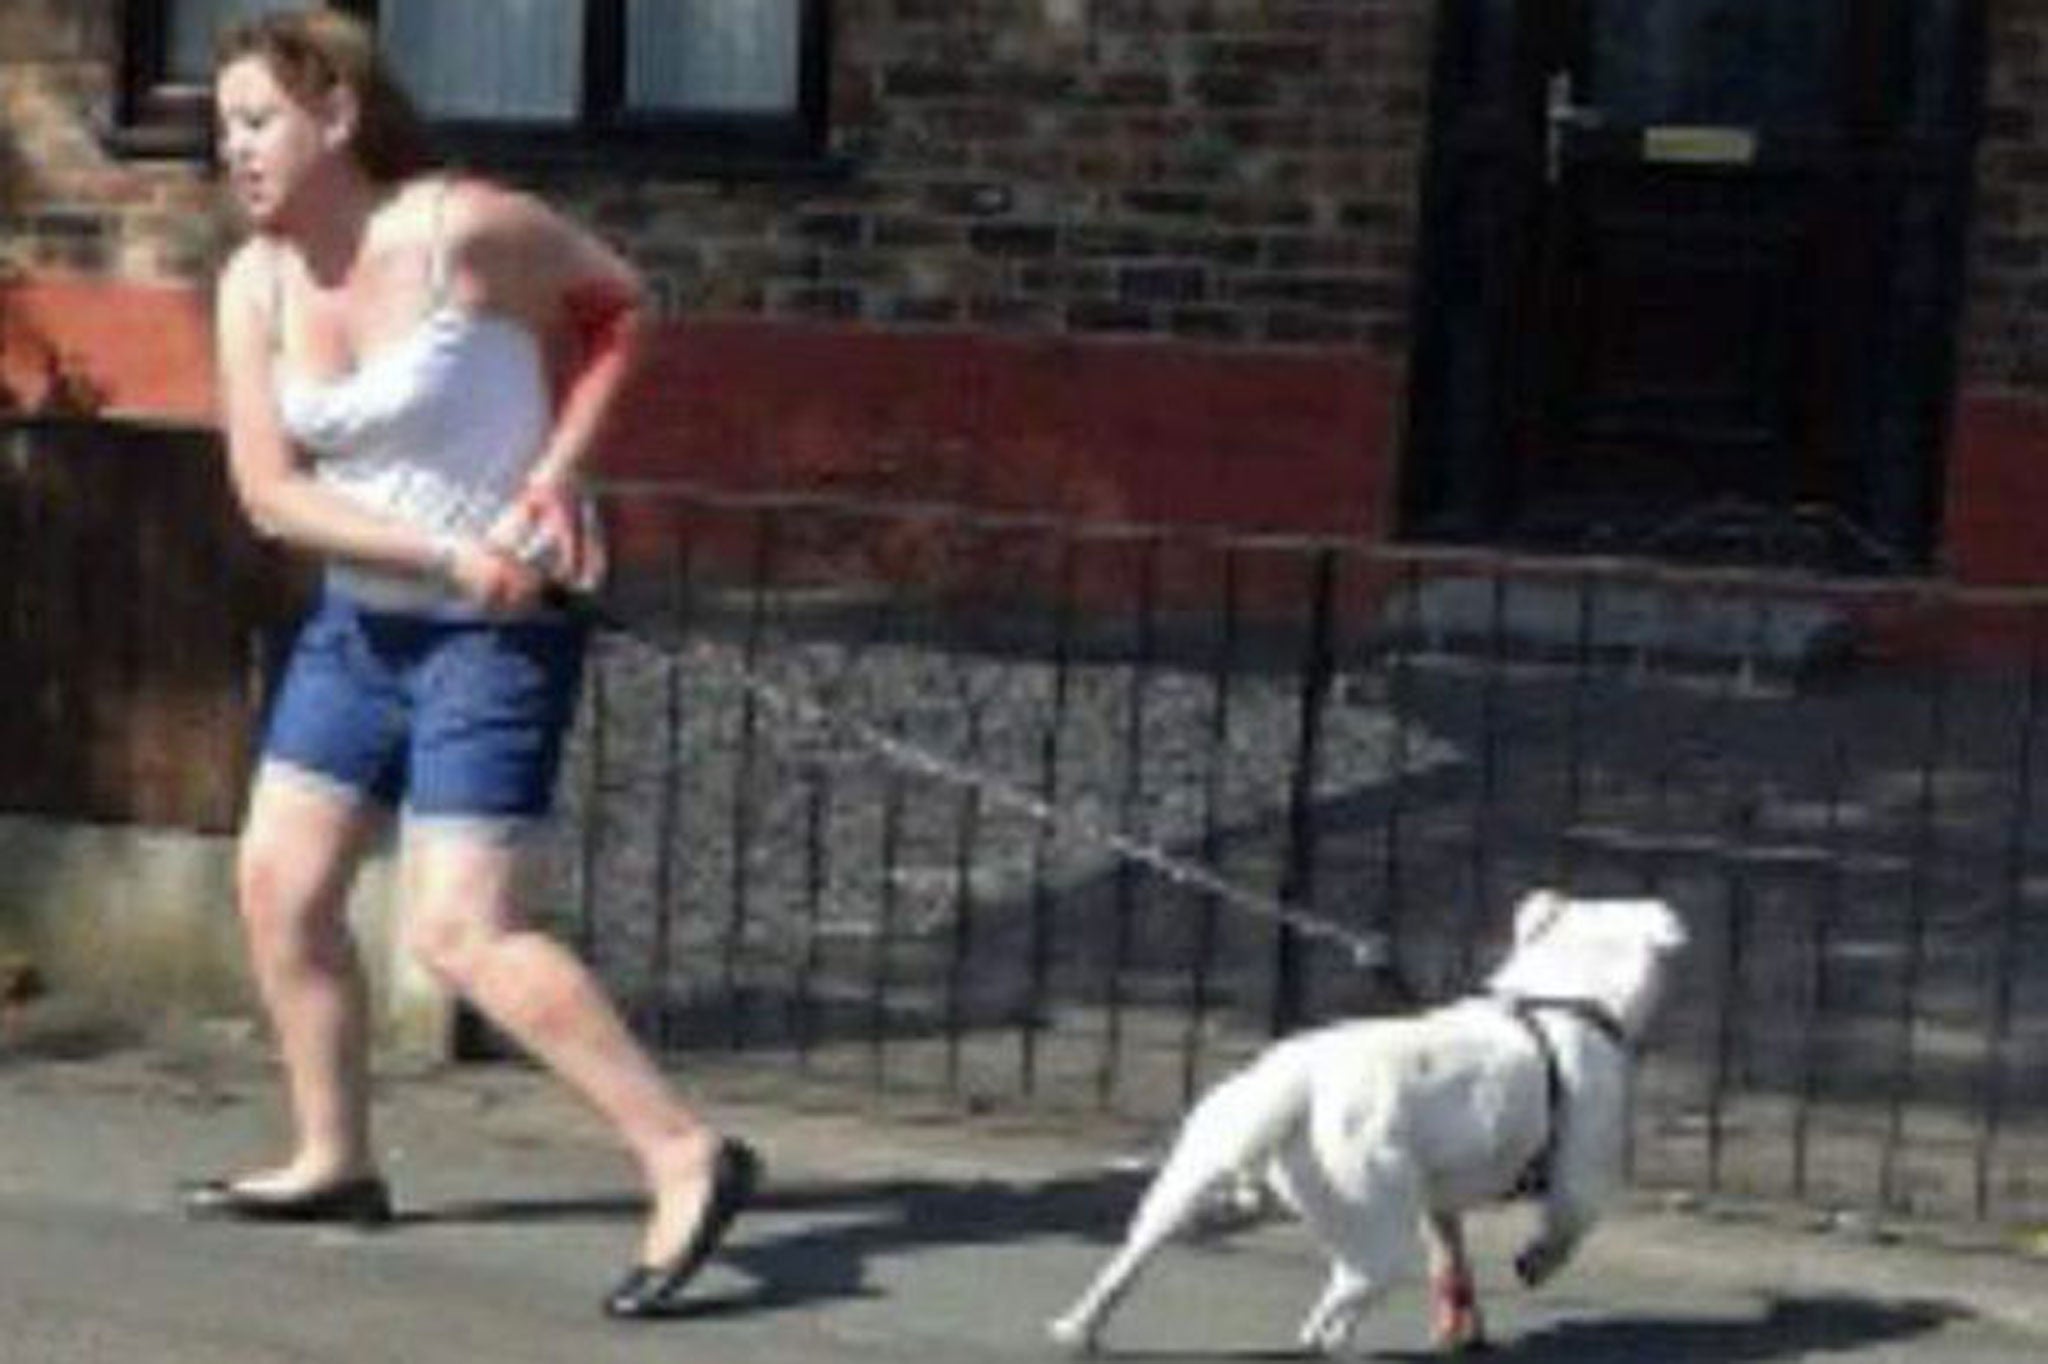 Images of the attack, which took place on Saturday, show a woman and the dog believed to be responsible walking from the scene covered in blood. A Pomeranian dog named Elvis died as a result of the horrific attack.